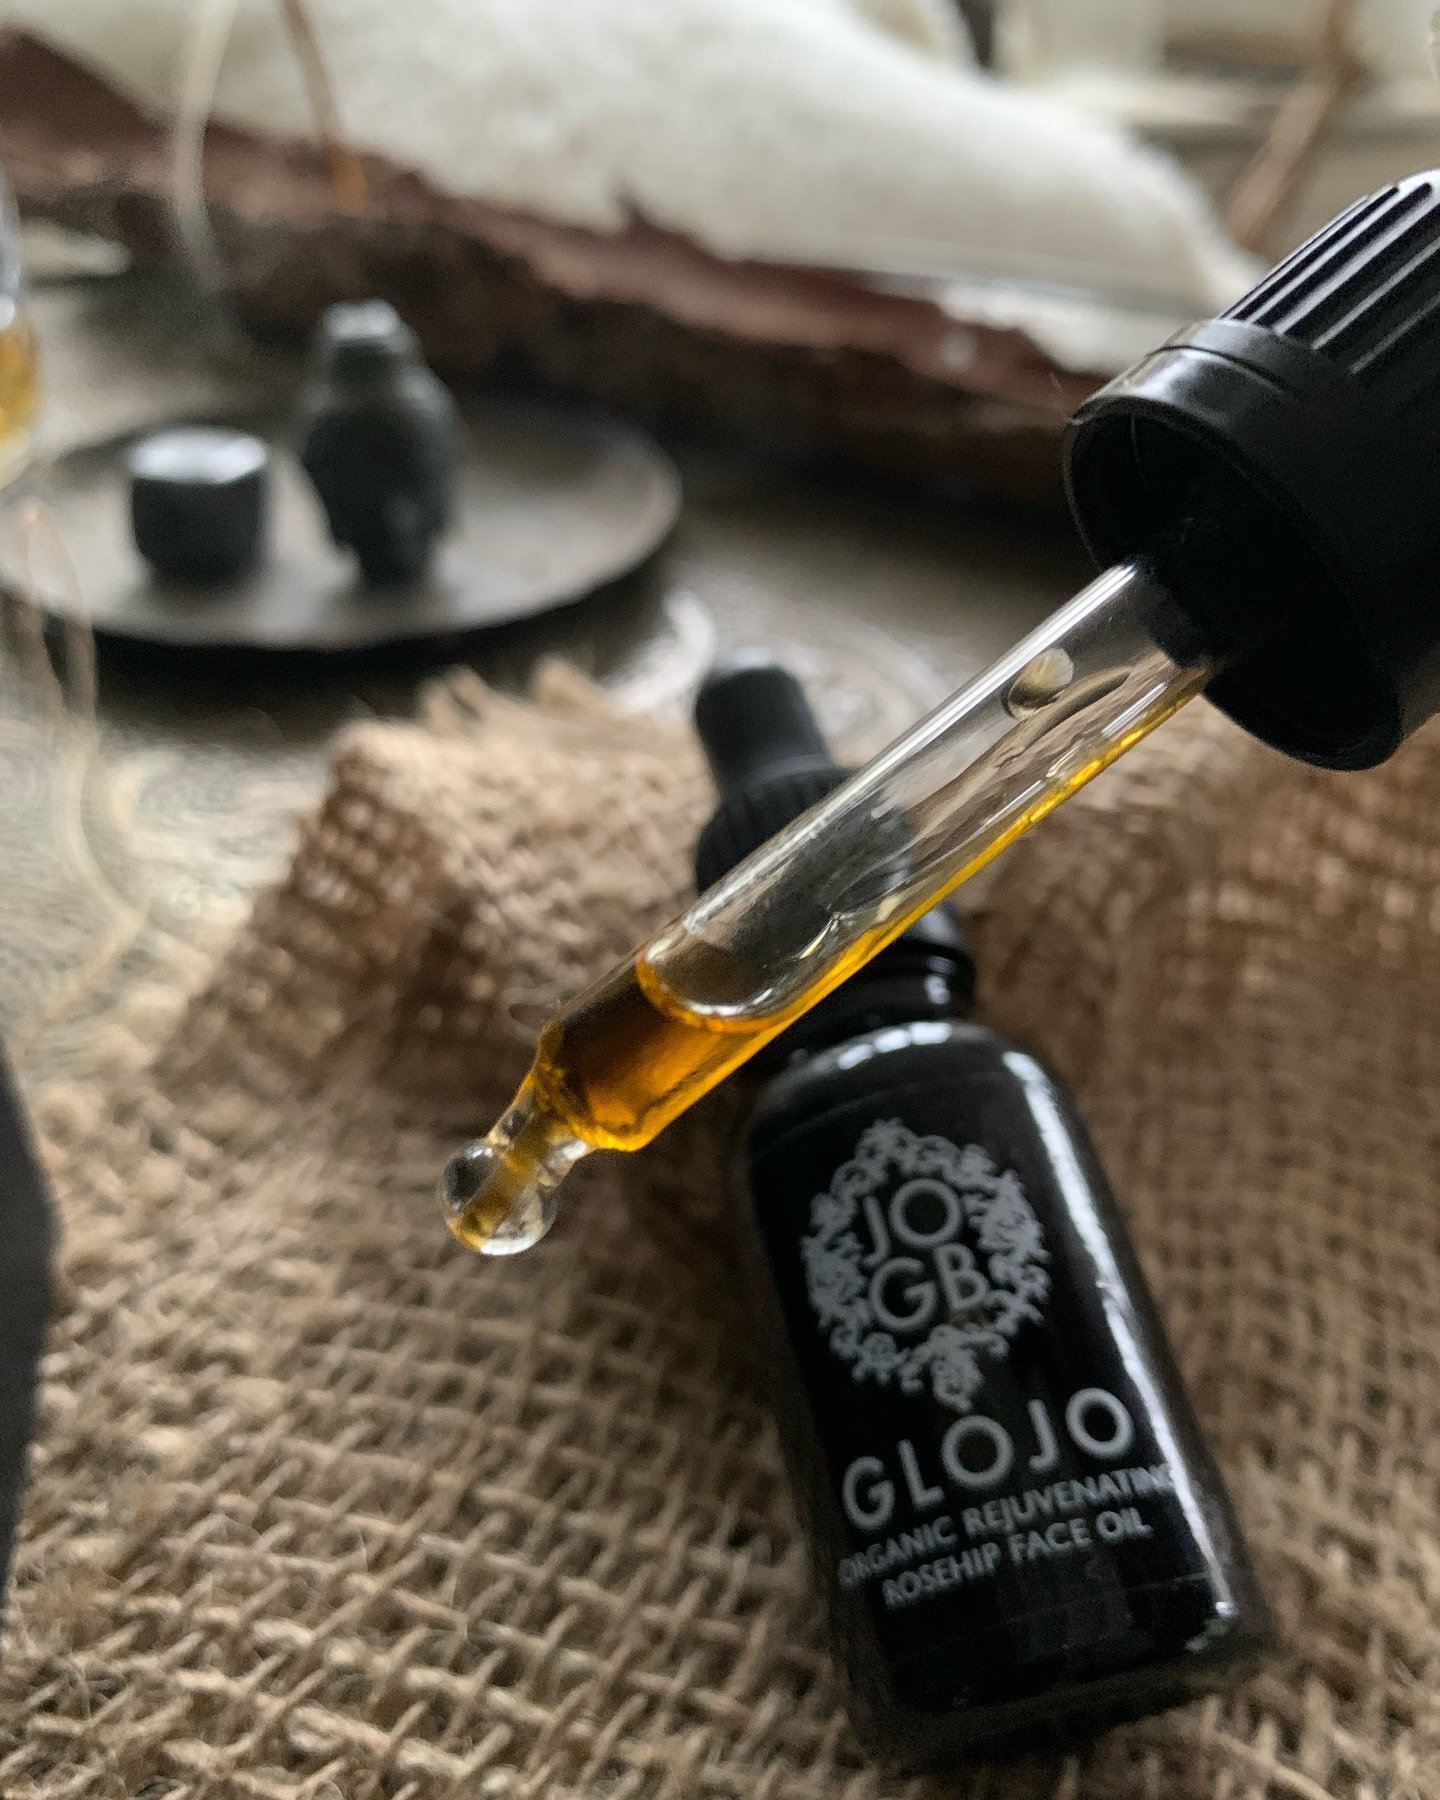 Welcome GLOJO 🌹 into the JOGB tribe &hellip; Rejuvenating Rosehip Face Oil - 100% pure, organic, cold pressed in Chile (where my sisters were born so it felt kinda right). 

The most transformative face oil that suits even the most sensitive of skin